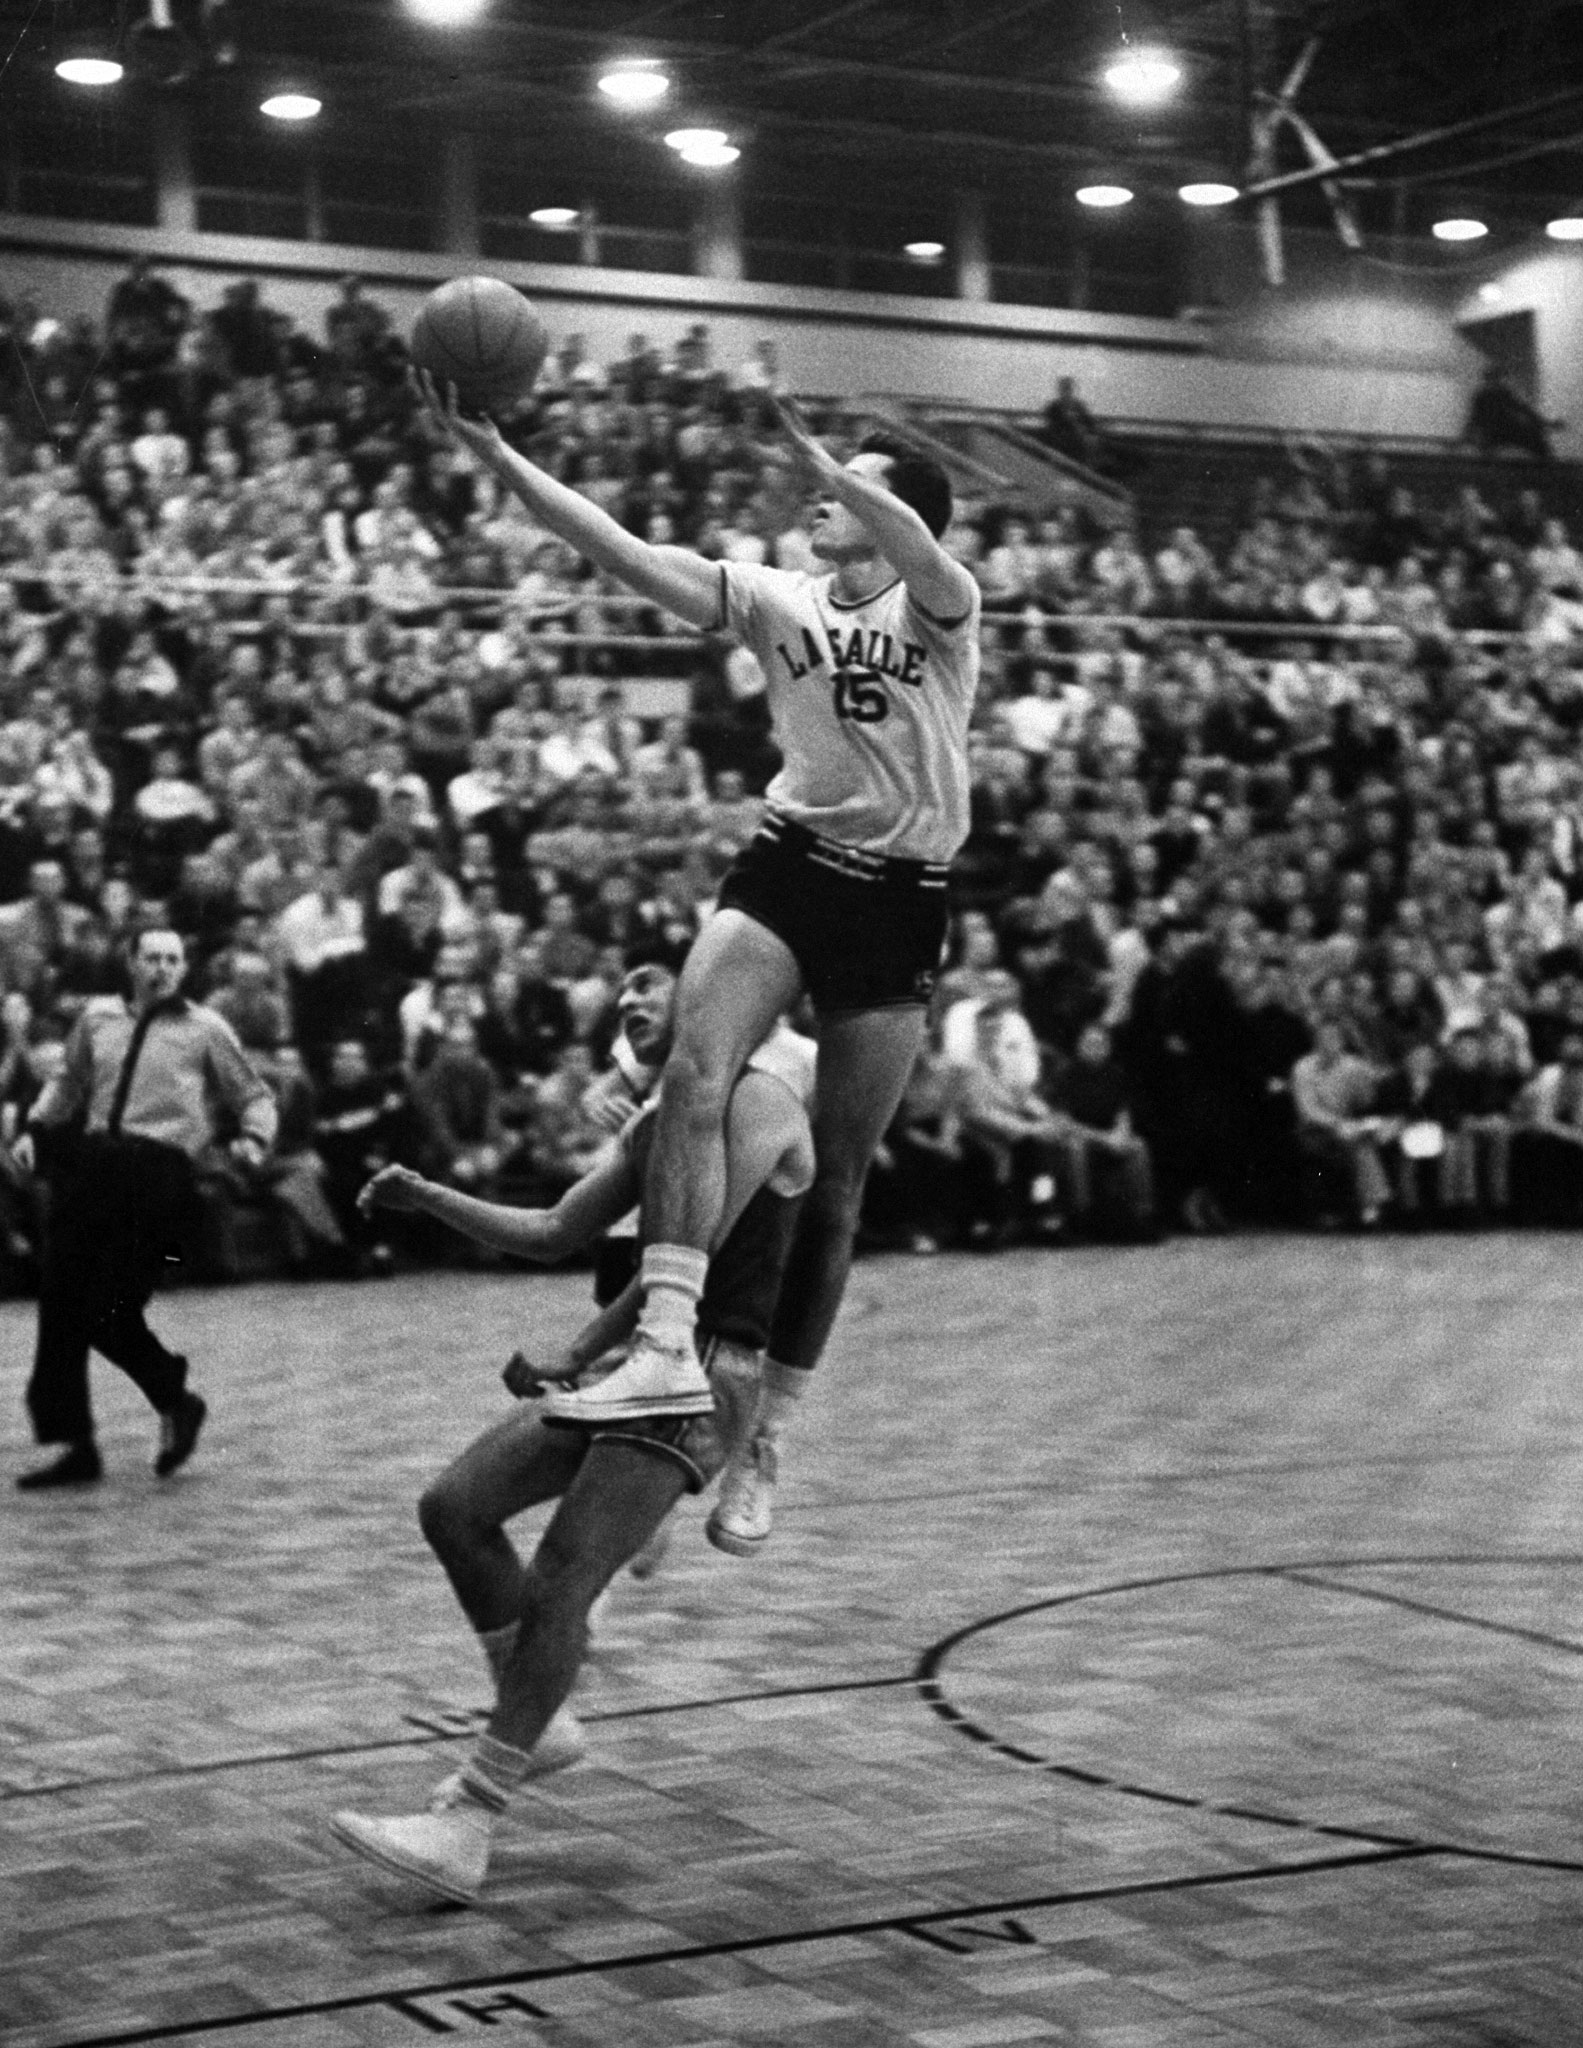 La Salle's Tom Gola (above, driving to the hoop in 1954) was one of the college game's earliest superstars, a do-it-all forward who still holds the Division I record for career rebounds (2,201). The four-time All-American also scored 2,462 points, for career averages of 20.9 points and 18.7 rebounds.